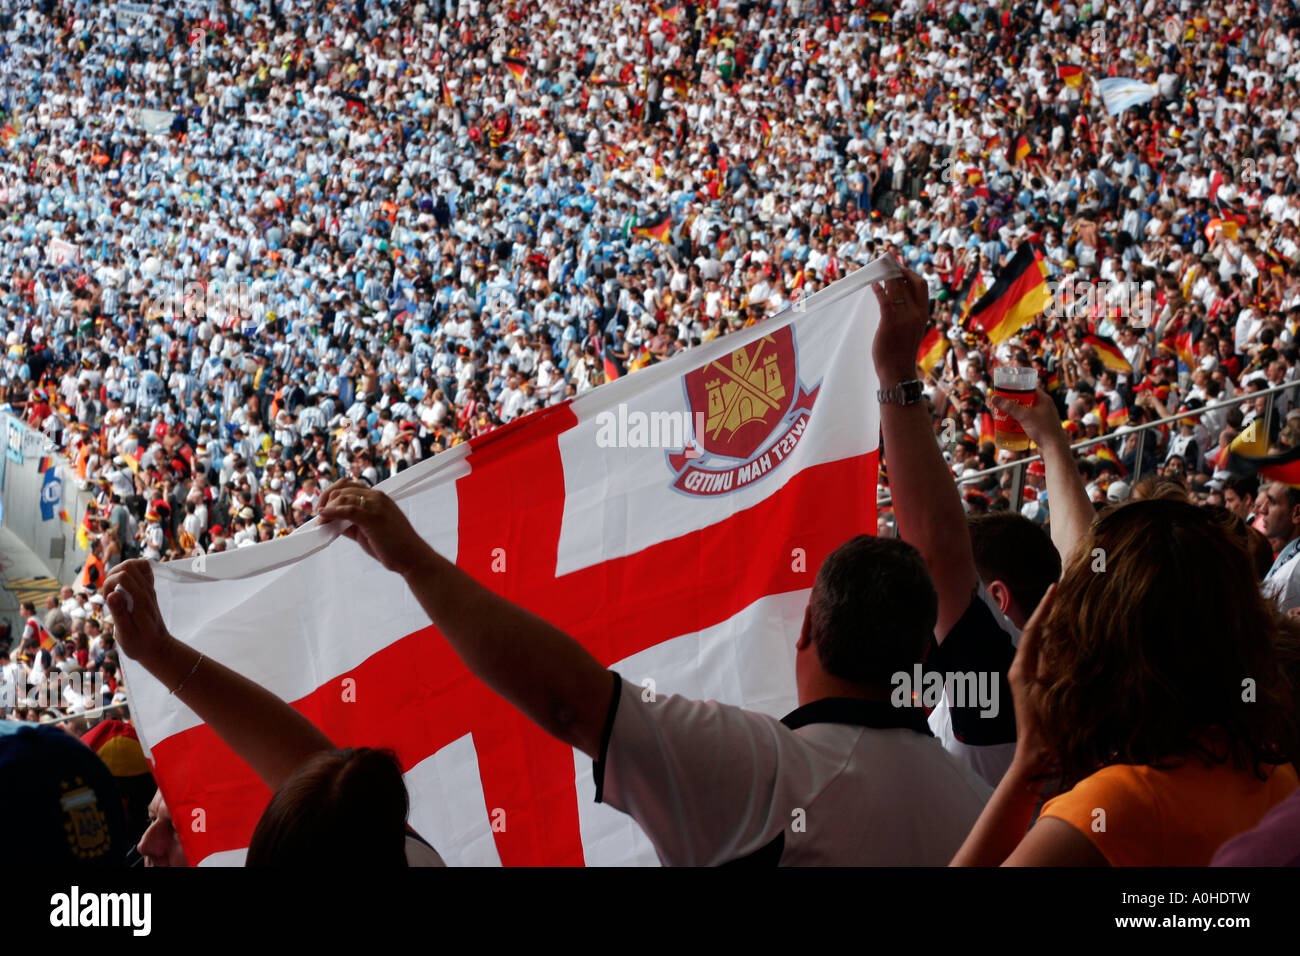 English West Ham fans amongst the crowd in the Berlin stadium at the World Cup quarter finals between Germany and Argentina. Stock Photo